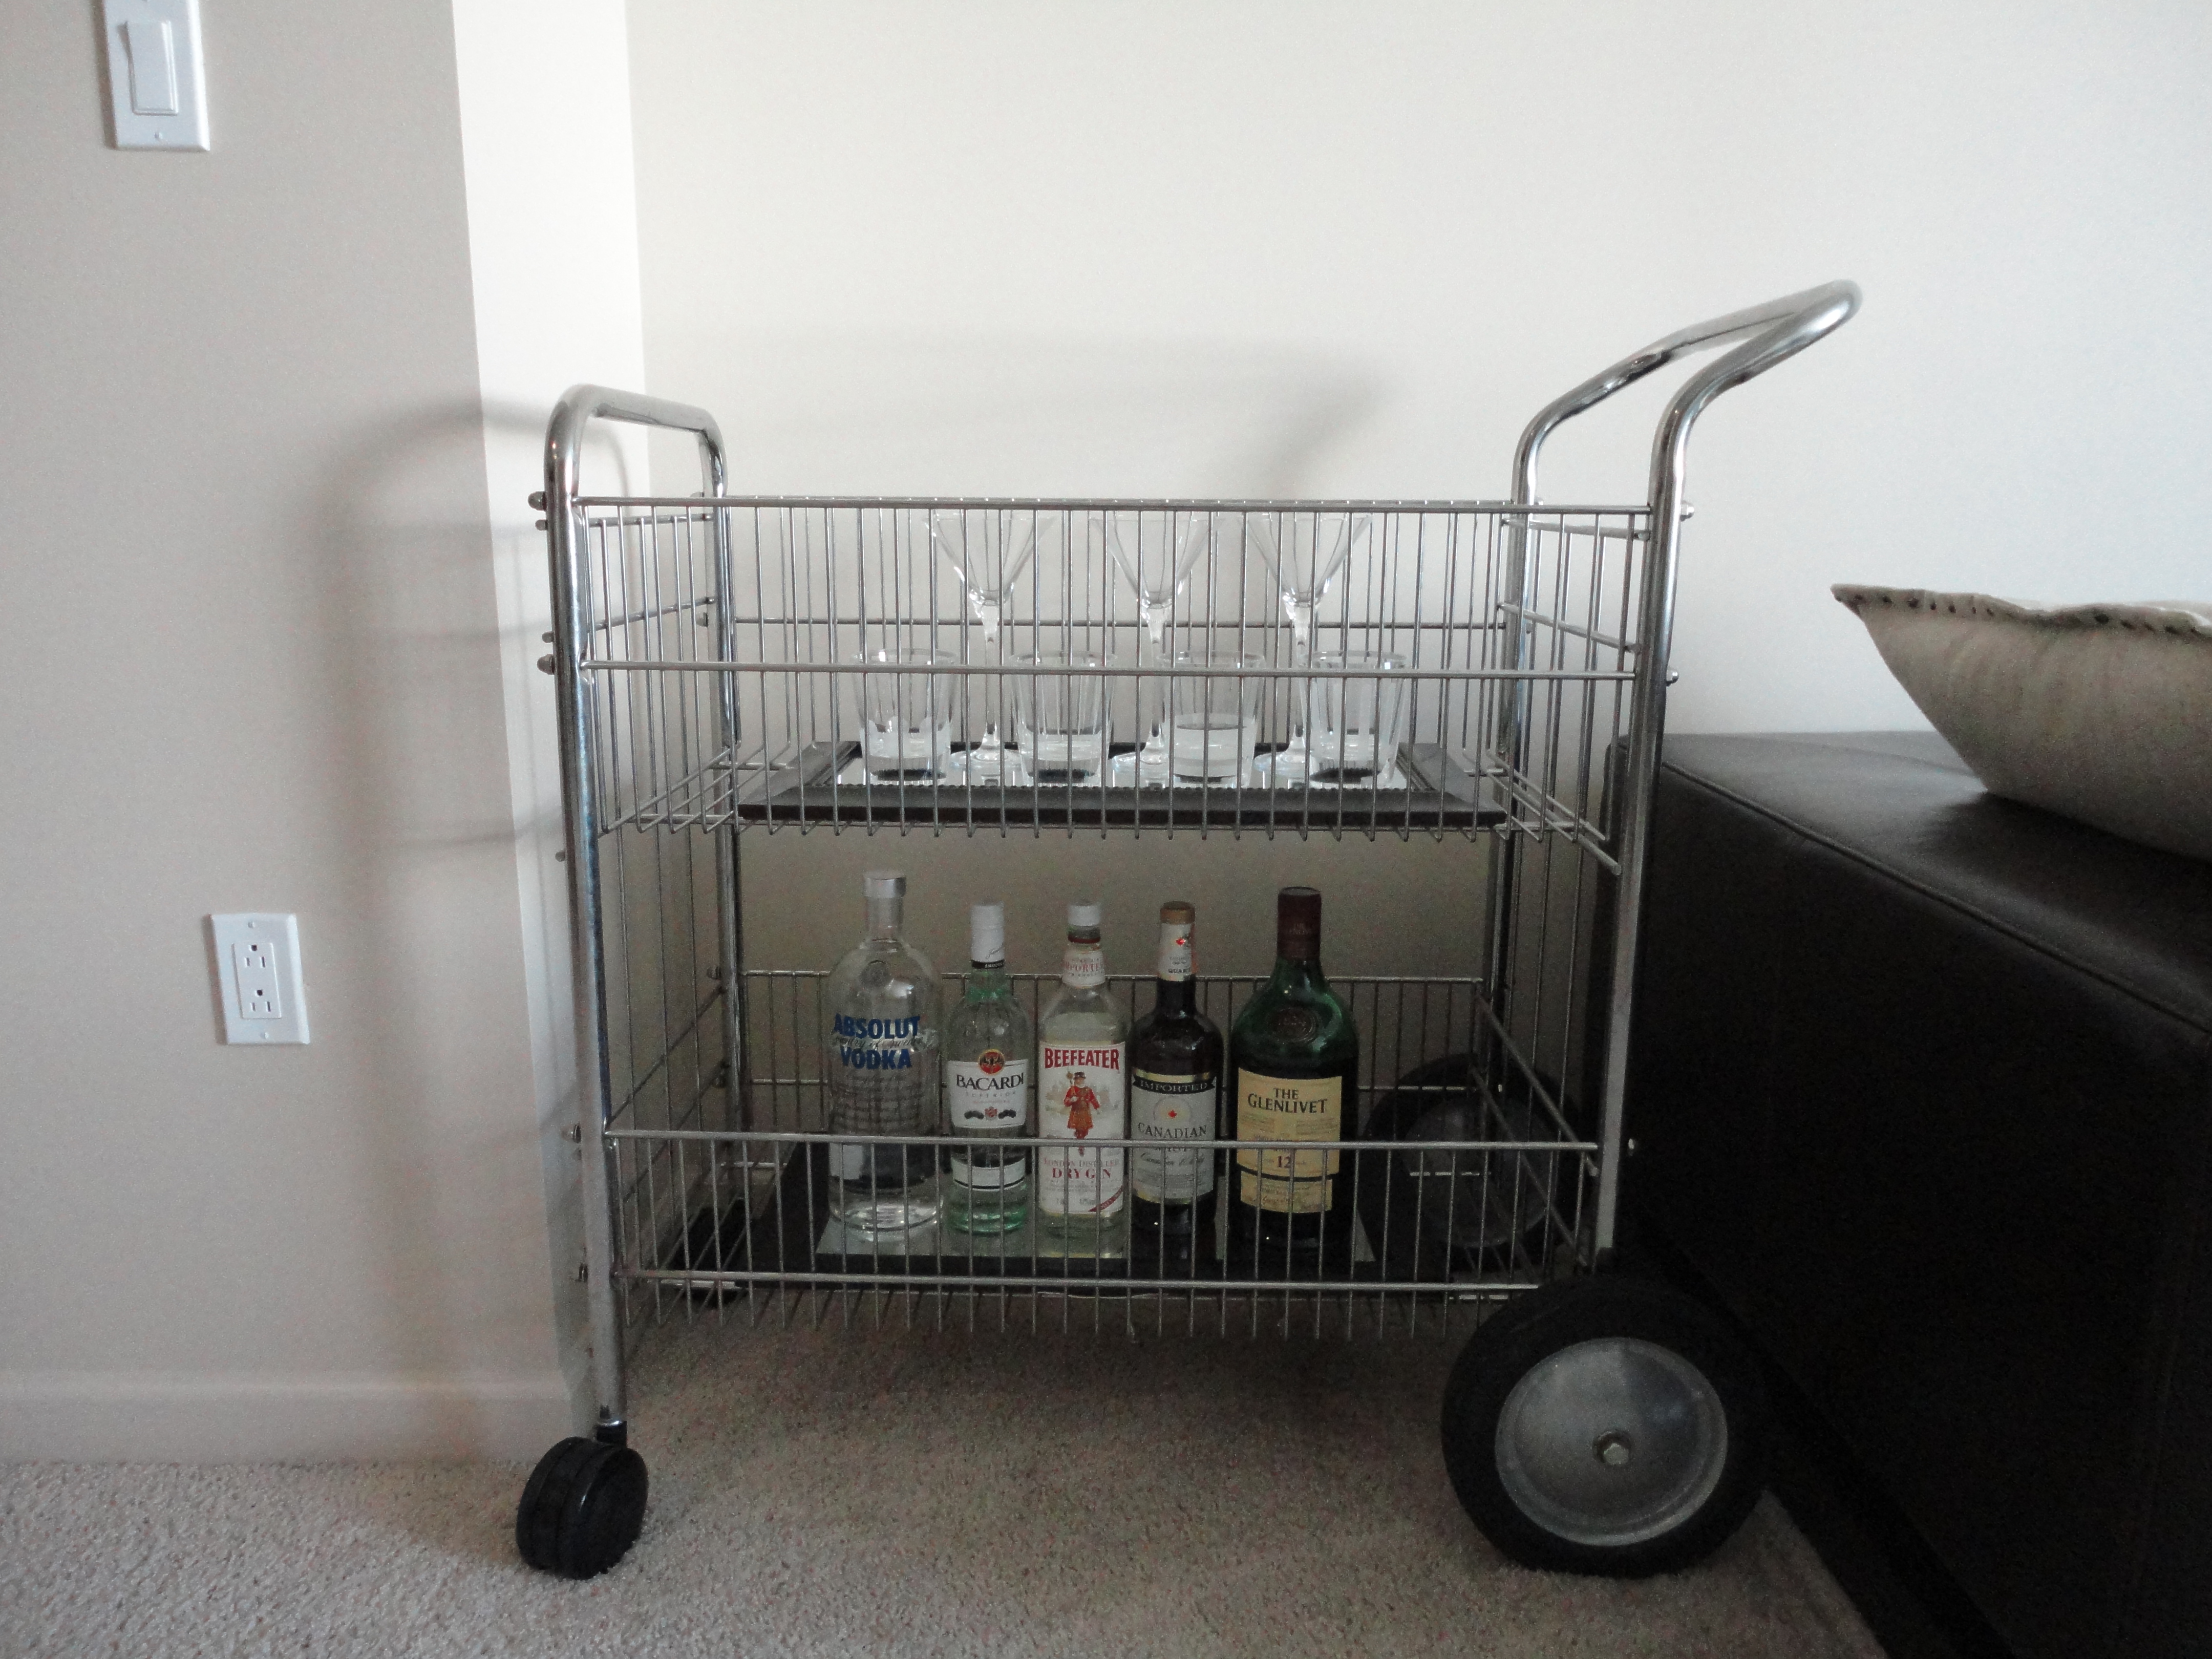 Office mail cart turned into a bar cart